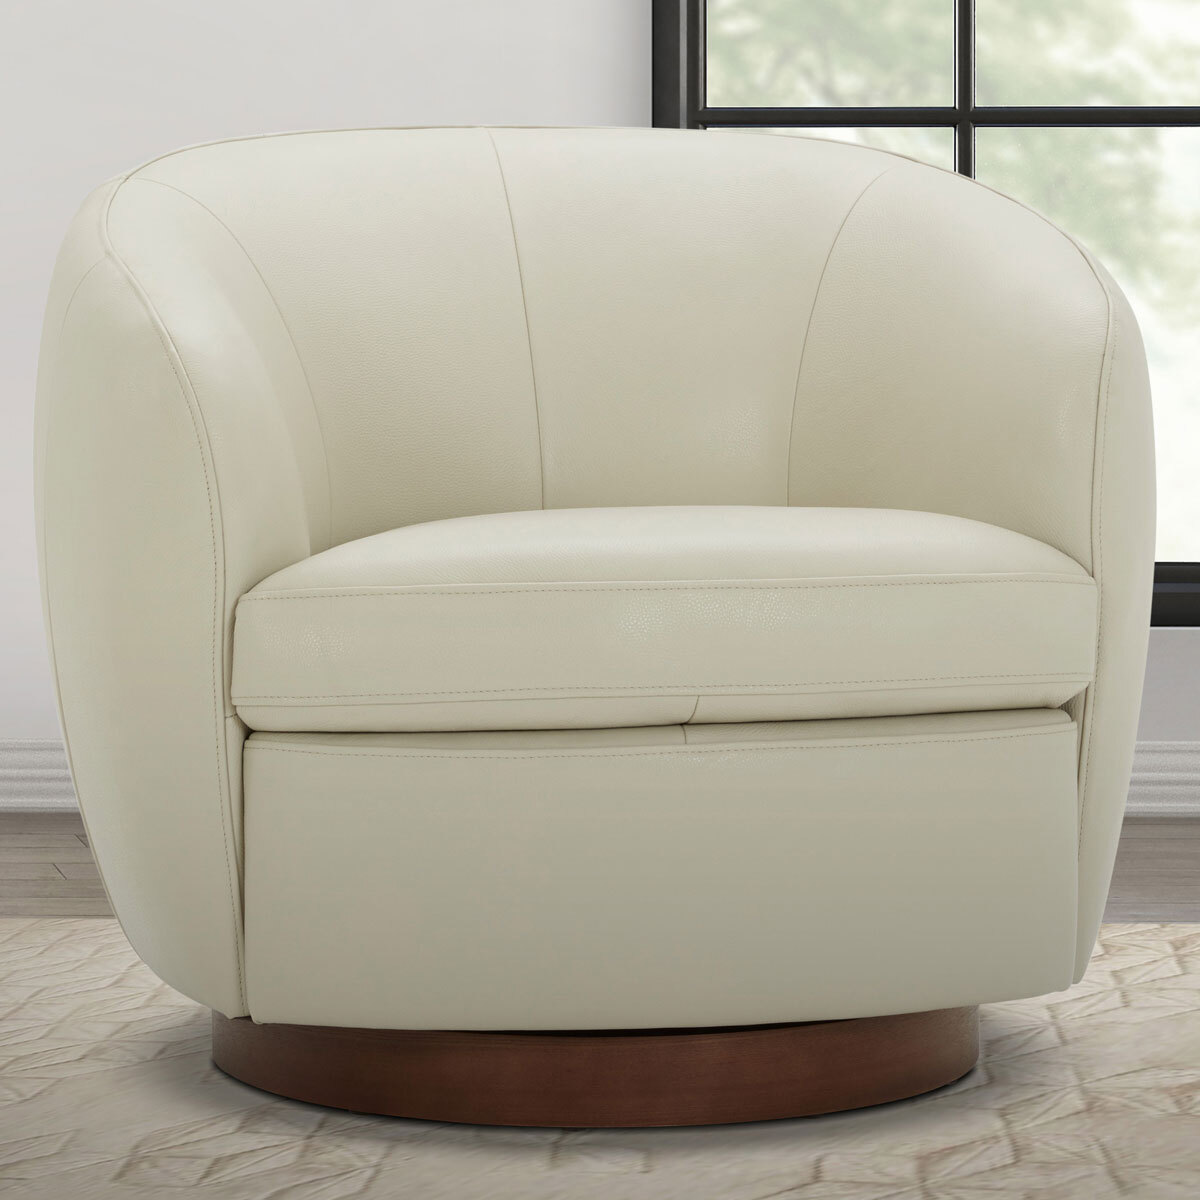 Top Grain Leather Swivel Tub Chair, Leather Swivel Barrel Chair With Ottoman